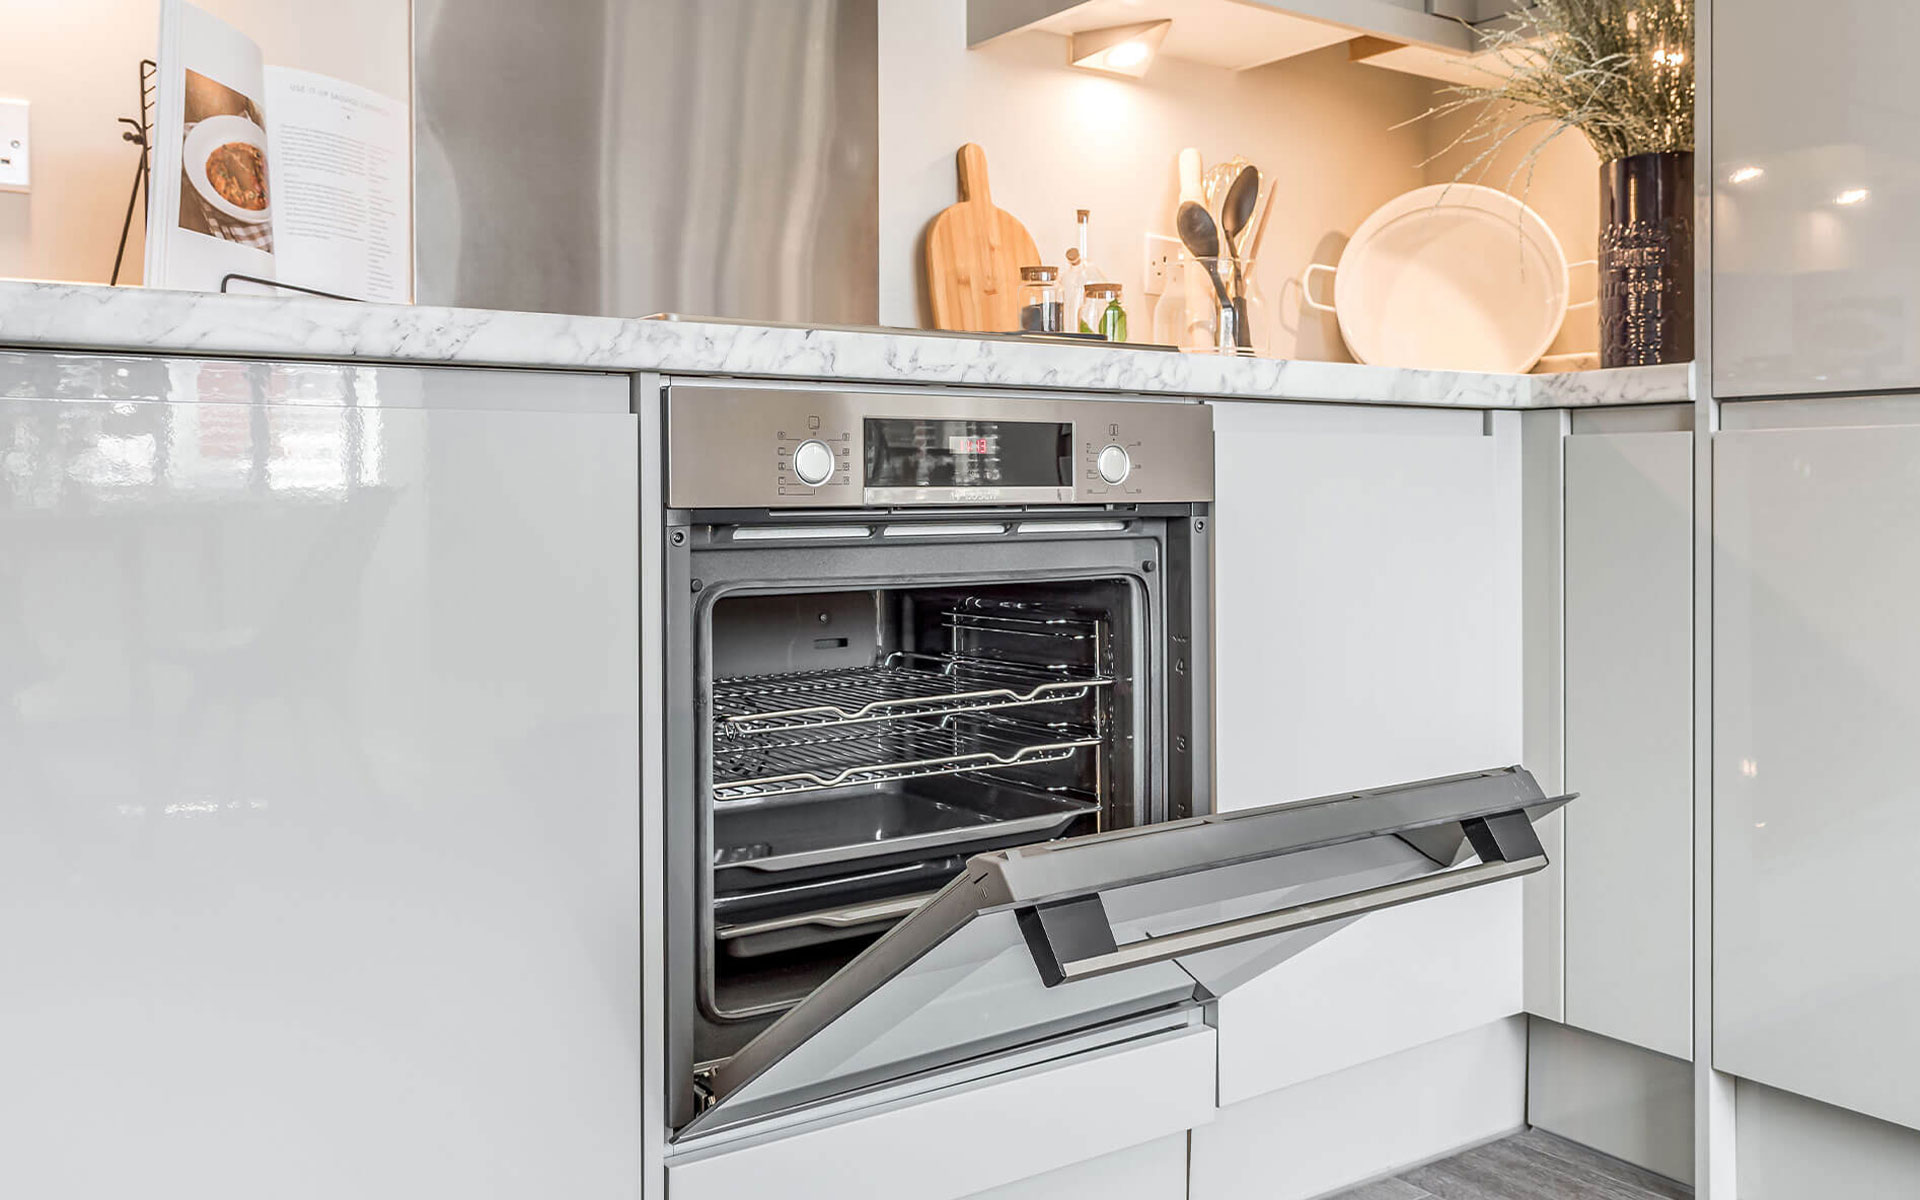 OHS CG Thedaisy Kitchen Oven